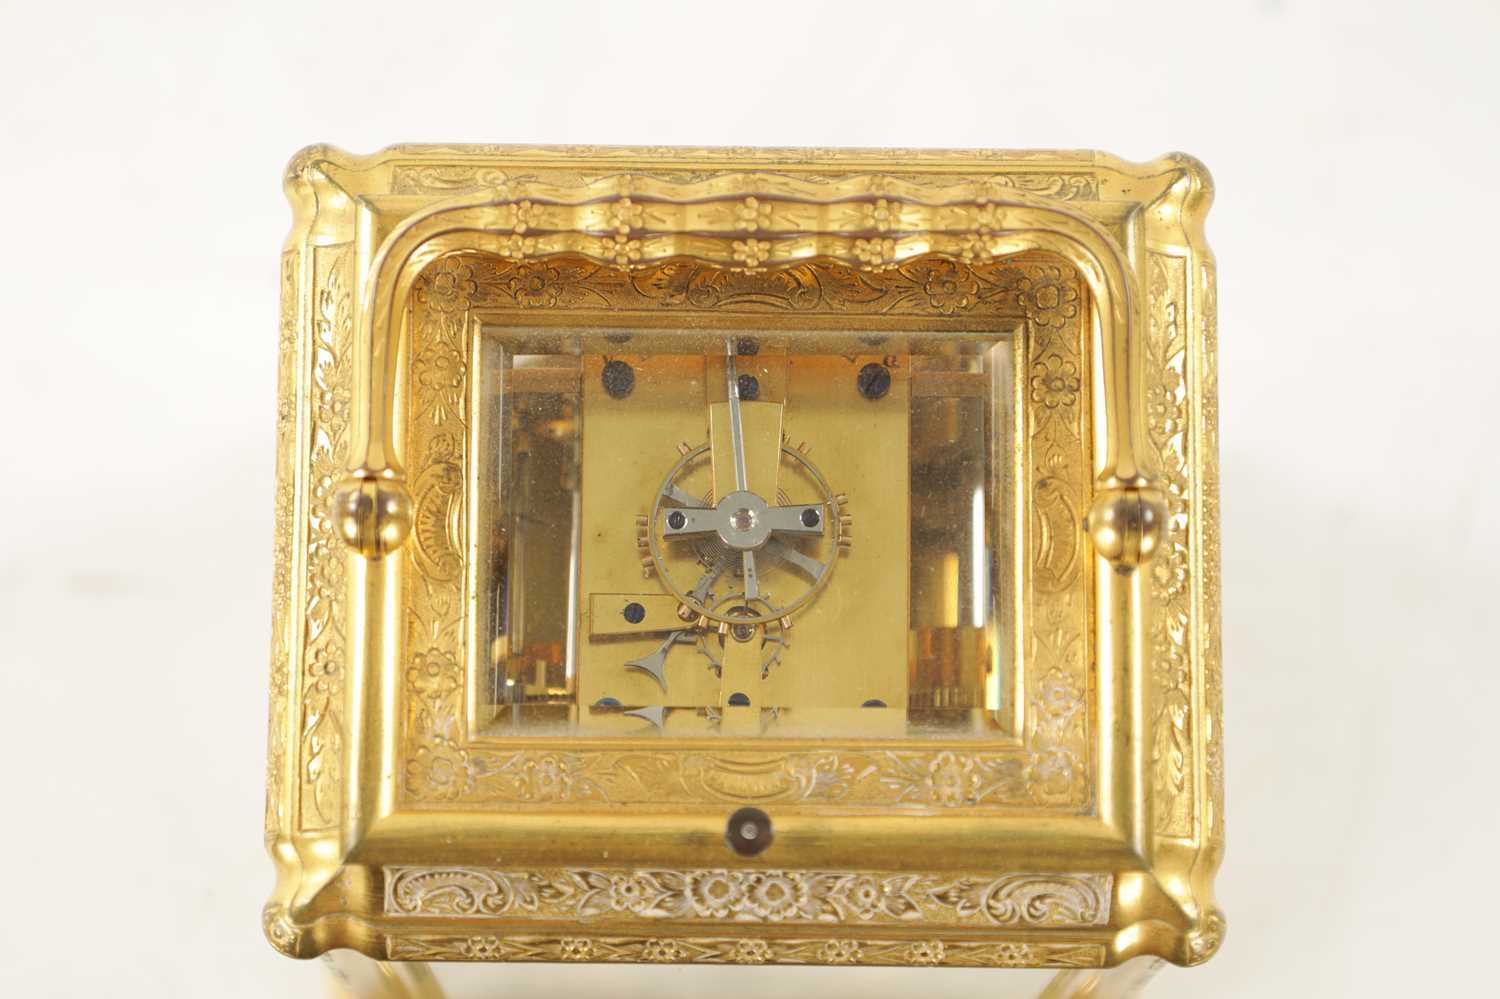 HENRI JACOT, PARIS. A LATE 19TH CENTURY FRENCH GRAND SONNERIE CARRIAGE CLOCK - Image 10 of 20